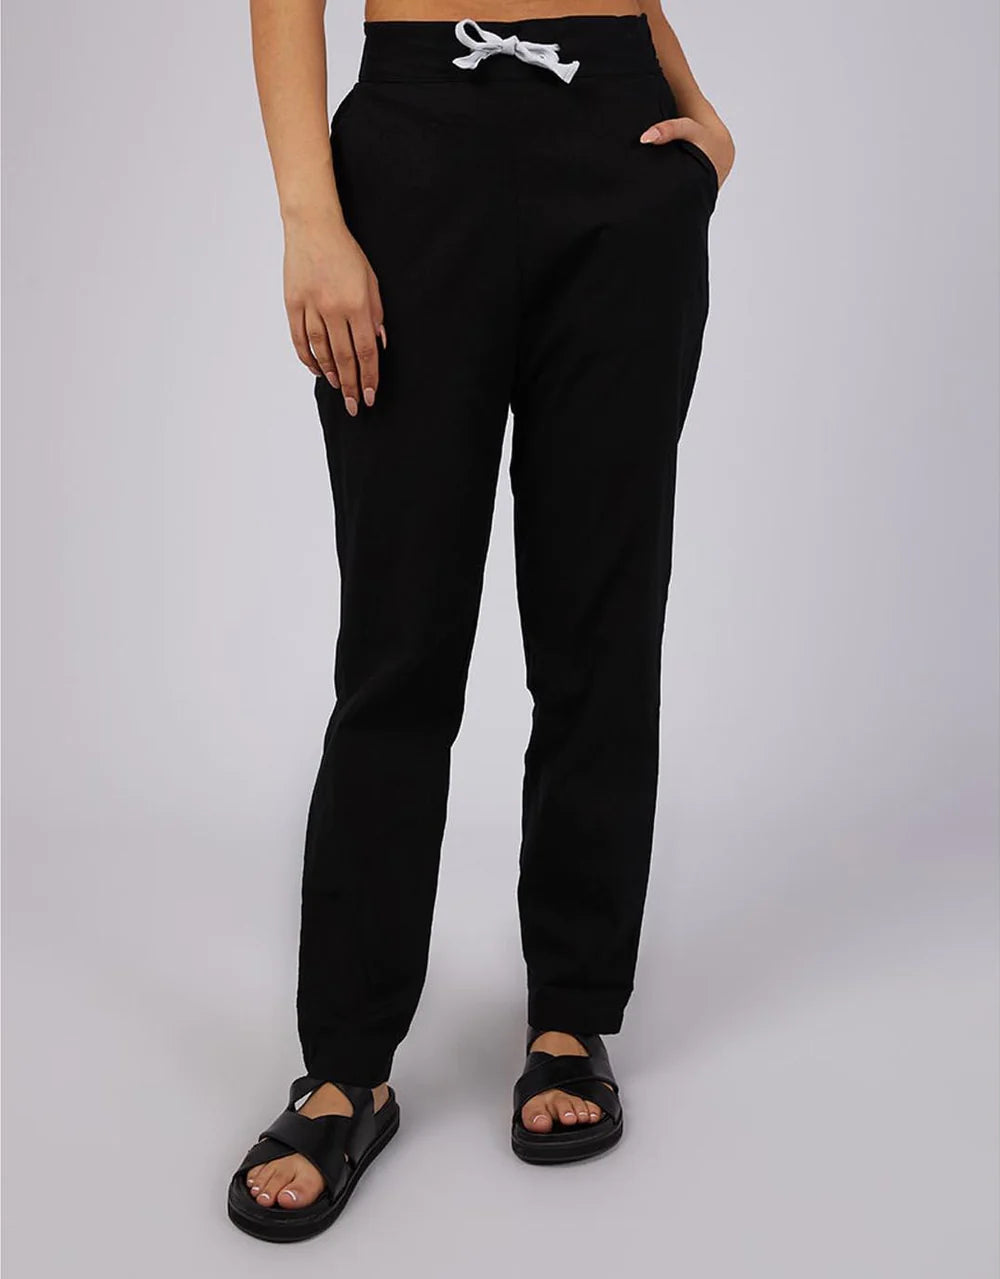 SILENT THEORY TROPICAL PANT BLACK